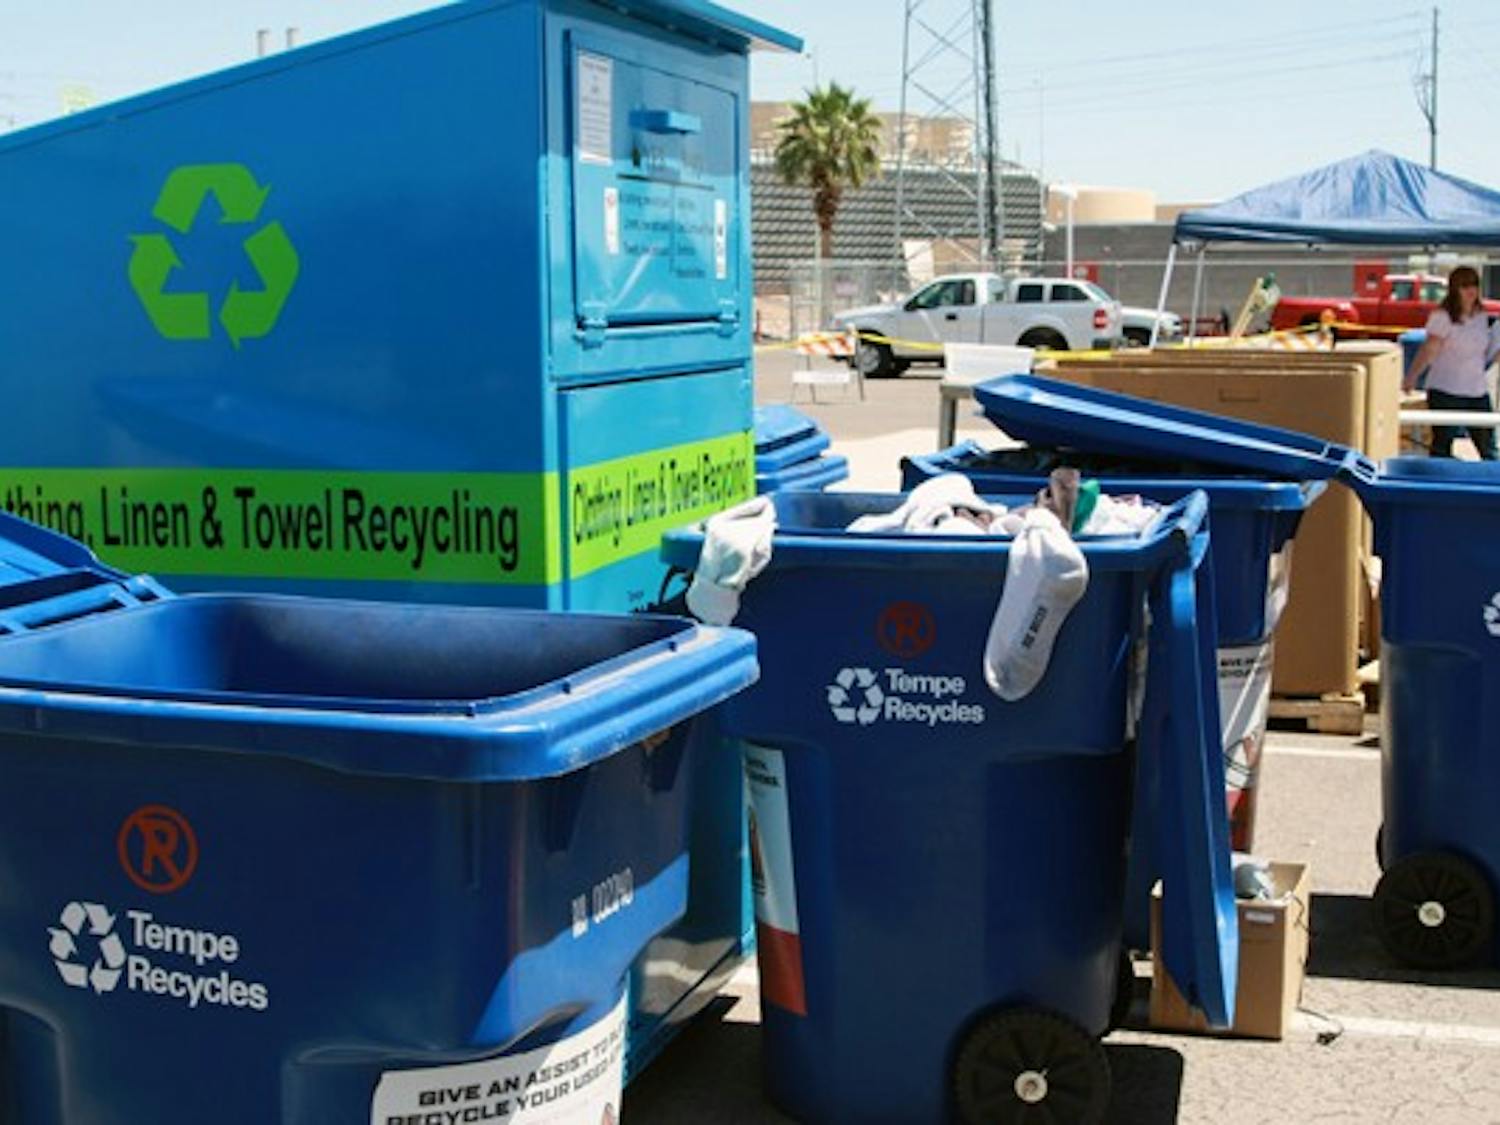 Tempe is now one of the few cities in Arizona that recycles fibers or used clothing, which is not only good for the environment but also creates more jobs. (Photo by Shelby Bernstein)